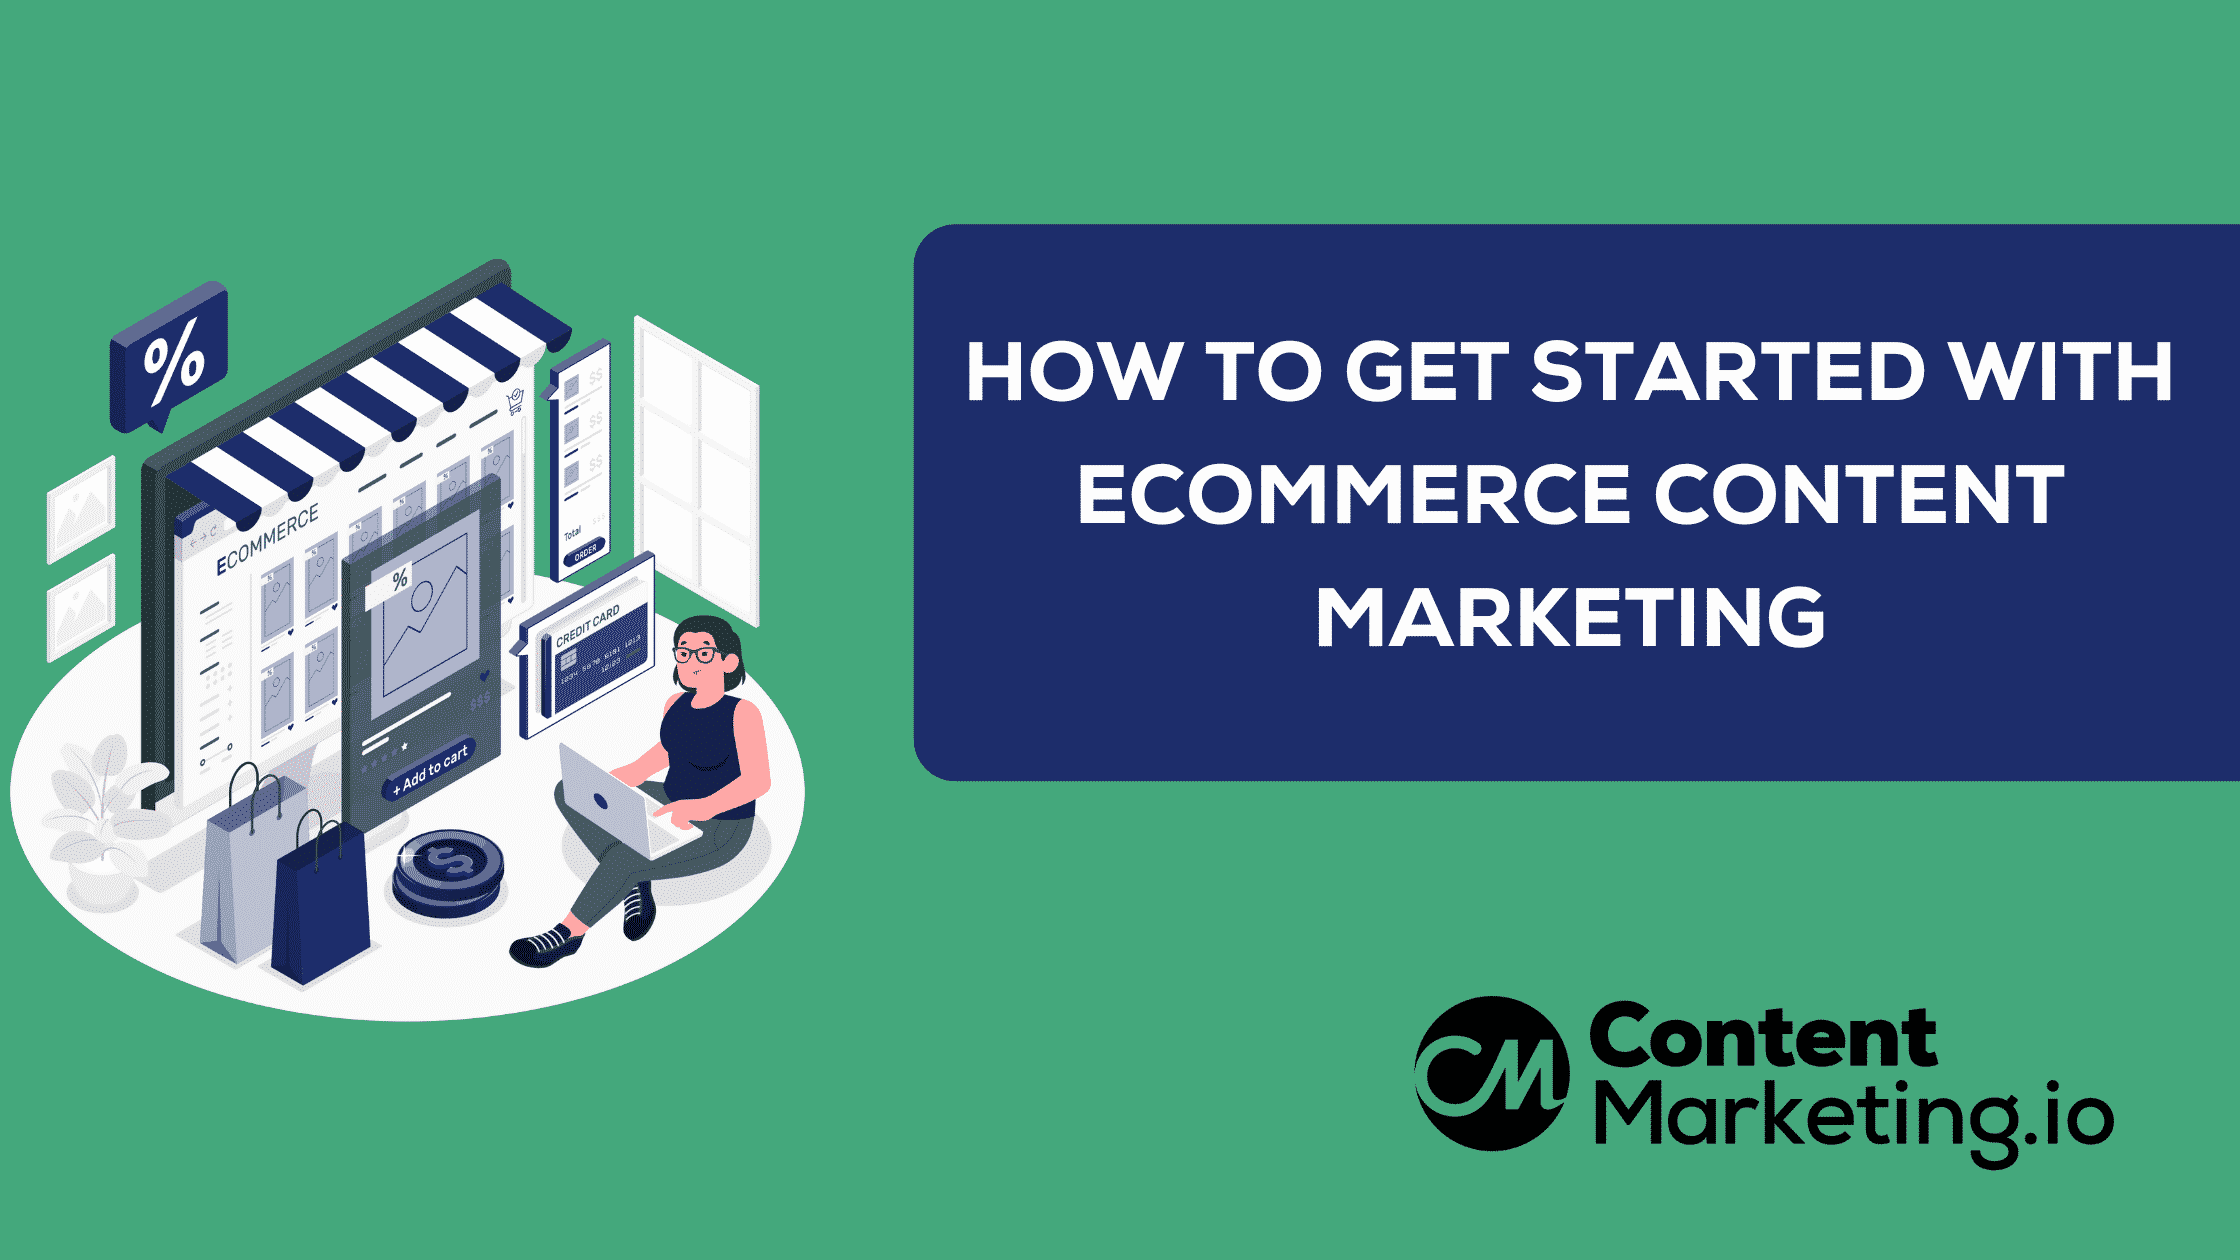 How to Get Started with eCommerce Content Marketing